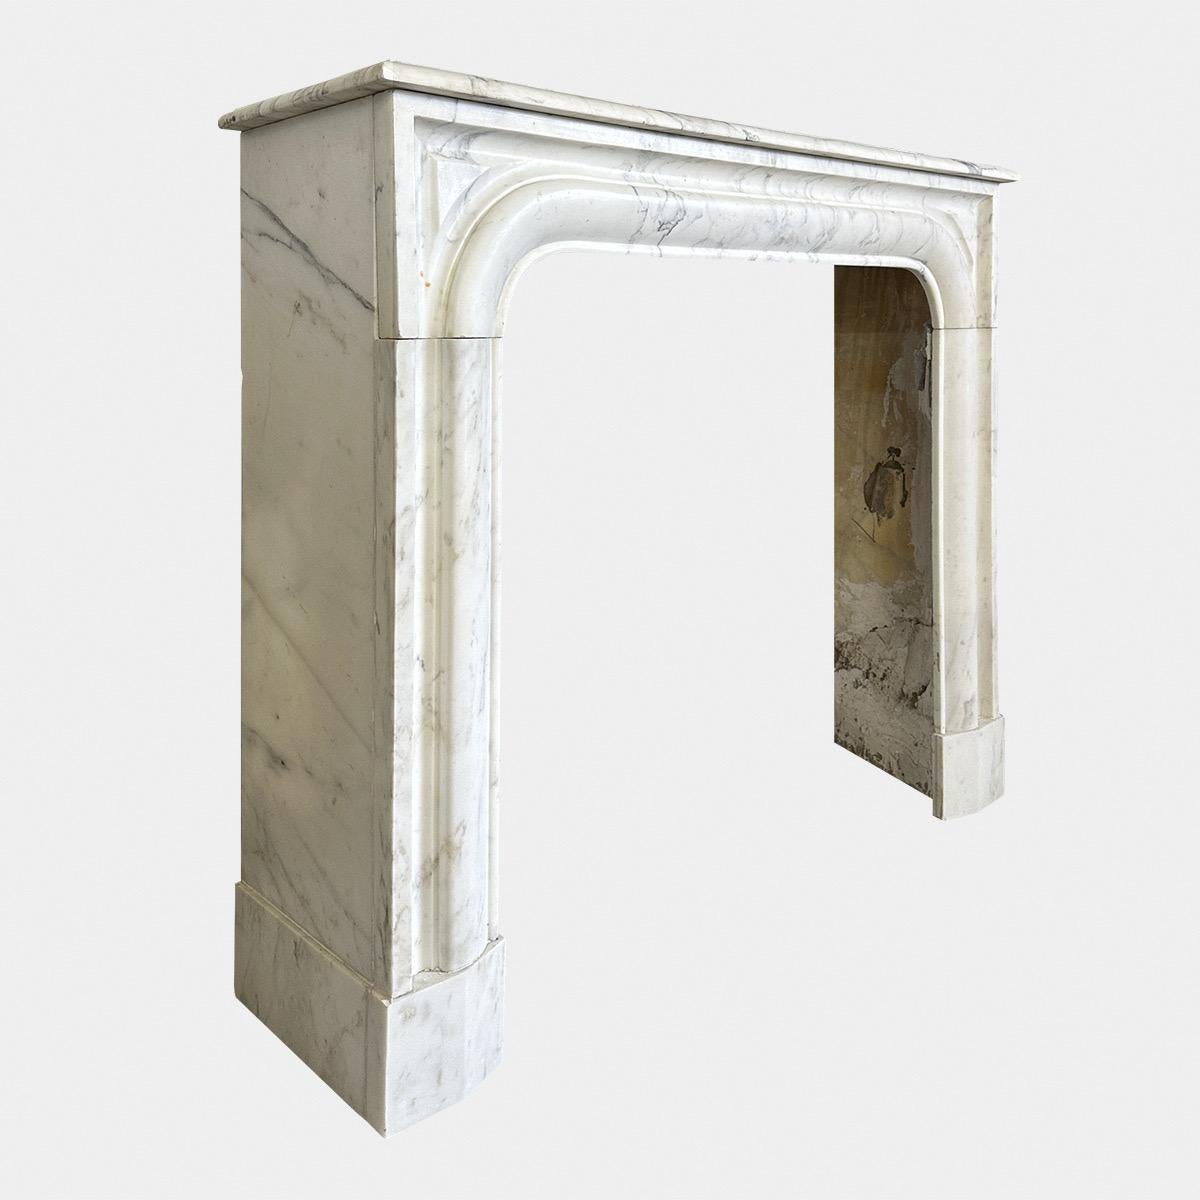 A French mid to late 19th c Louis XIV style Arabescato marble fireplace. Compact in size yet good scale and form in a very pale Italian Arabescato marble. Original depth on shelf and side returns, without breaks or repairs. Gentle moulded frame,